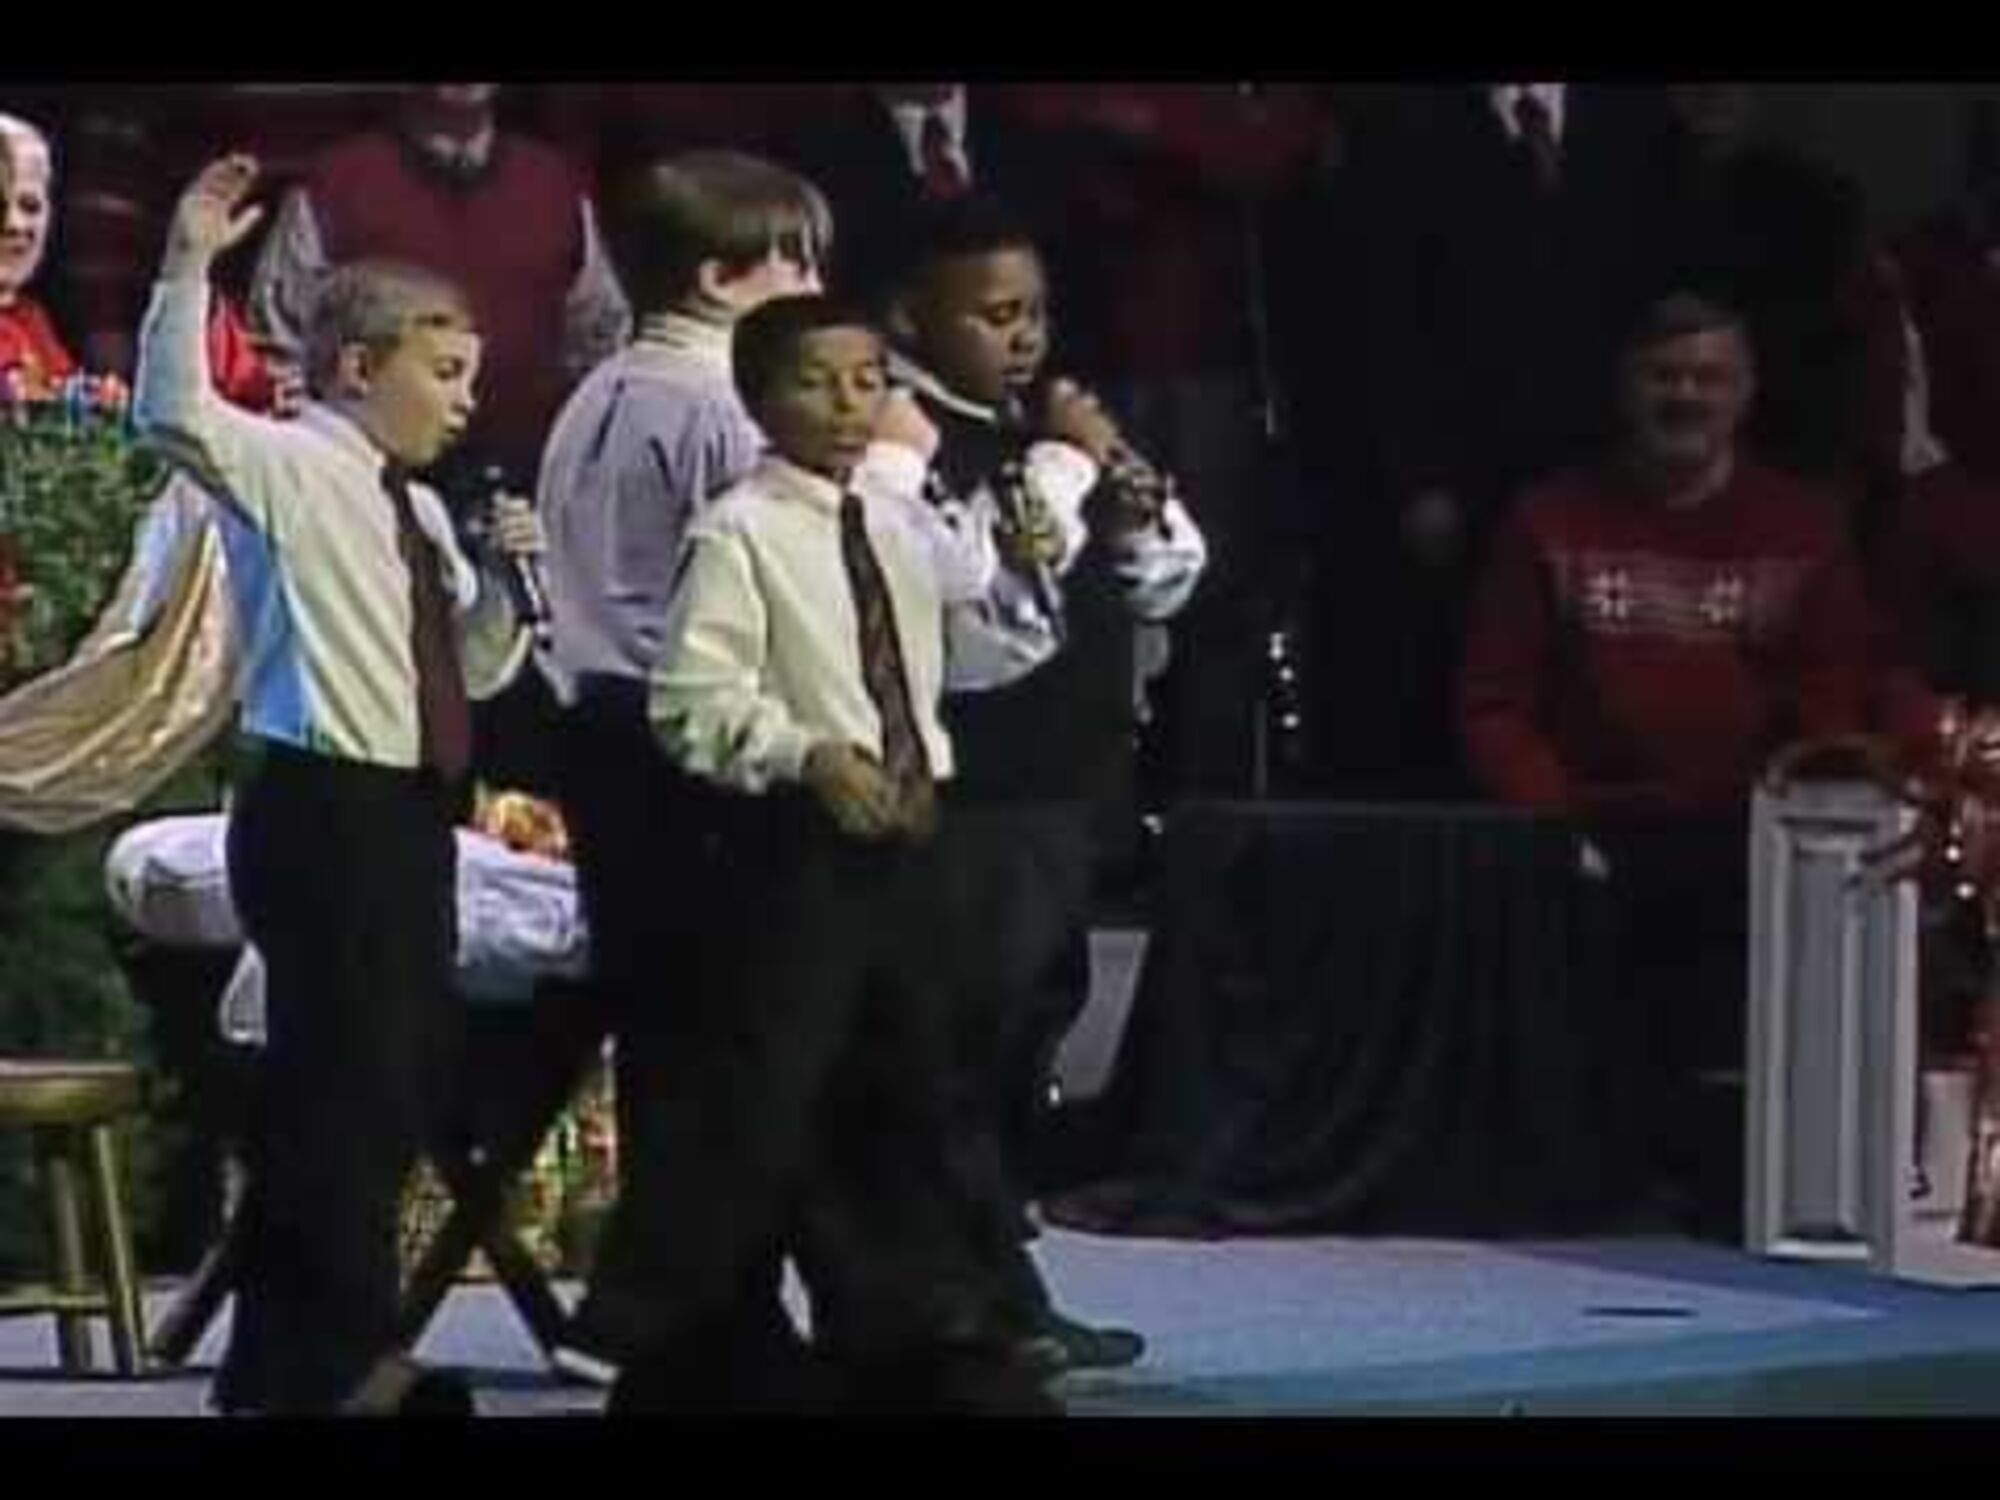 Gospel Quartet this is the funniest thing I have seen in a long, long time!!!!!